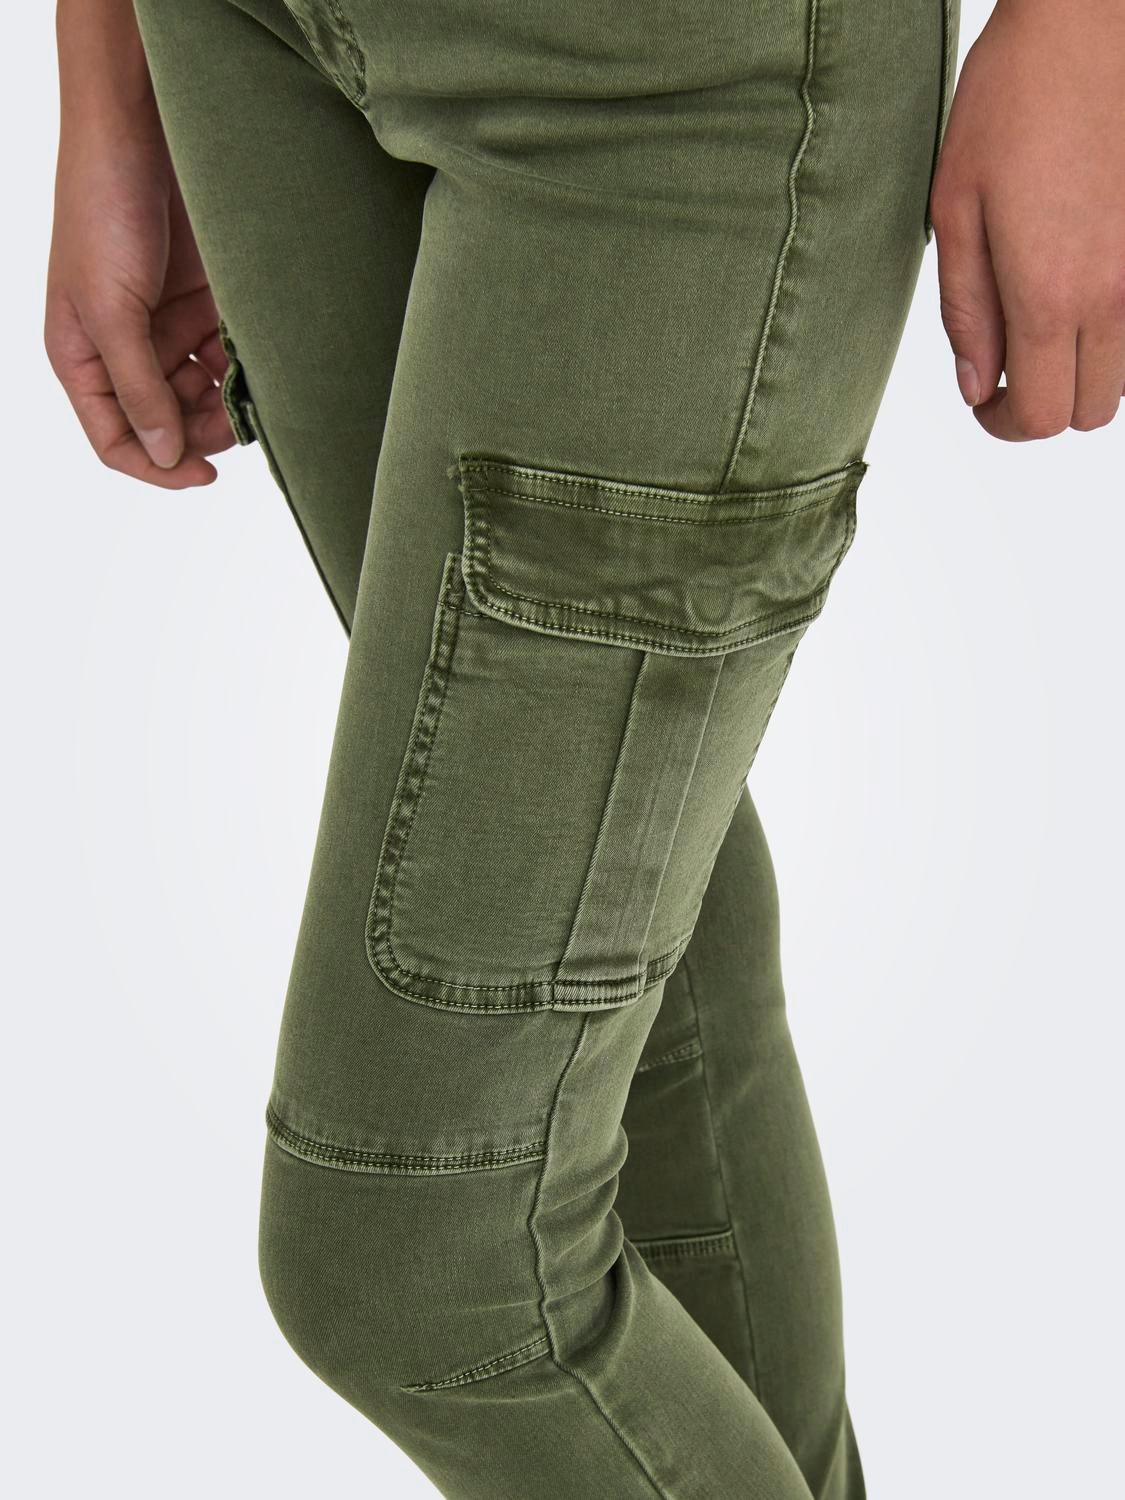 ONLY Ankle Cargo pants -Kalamata - 15170889